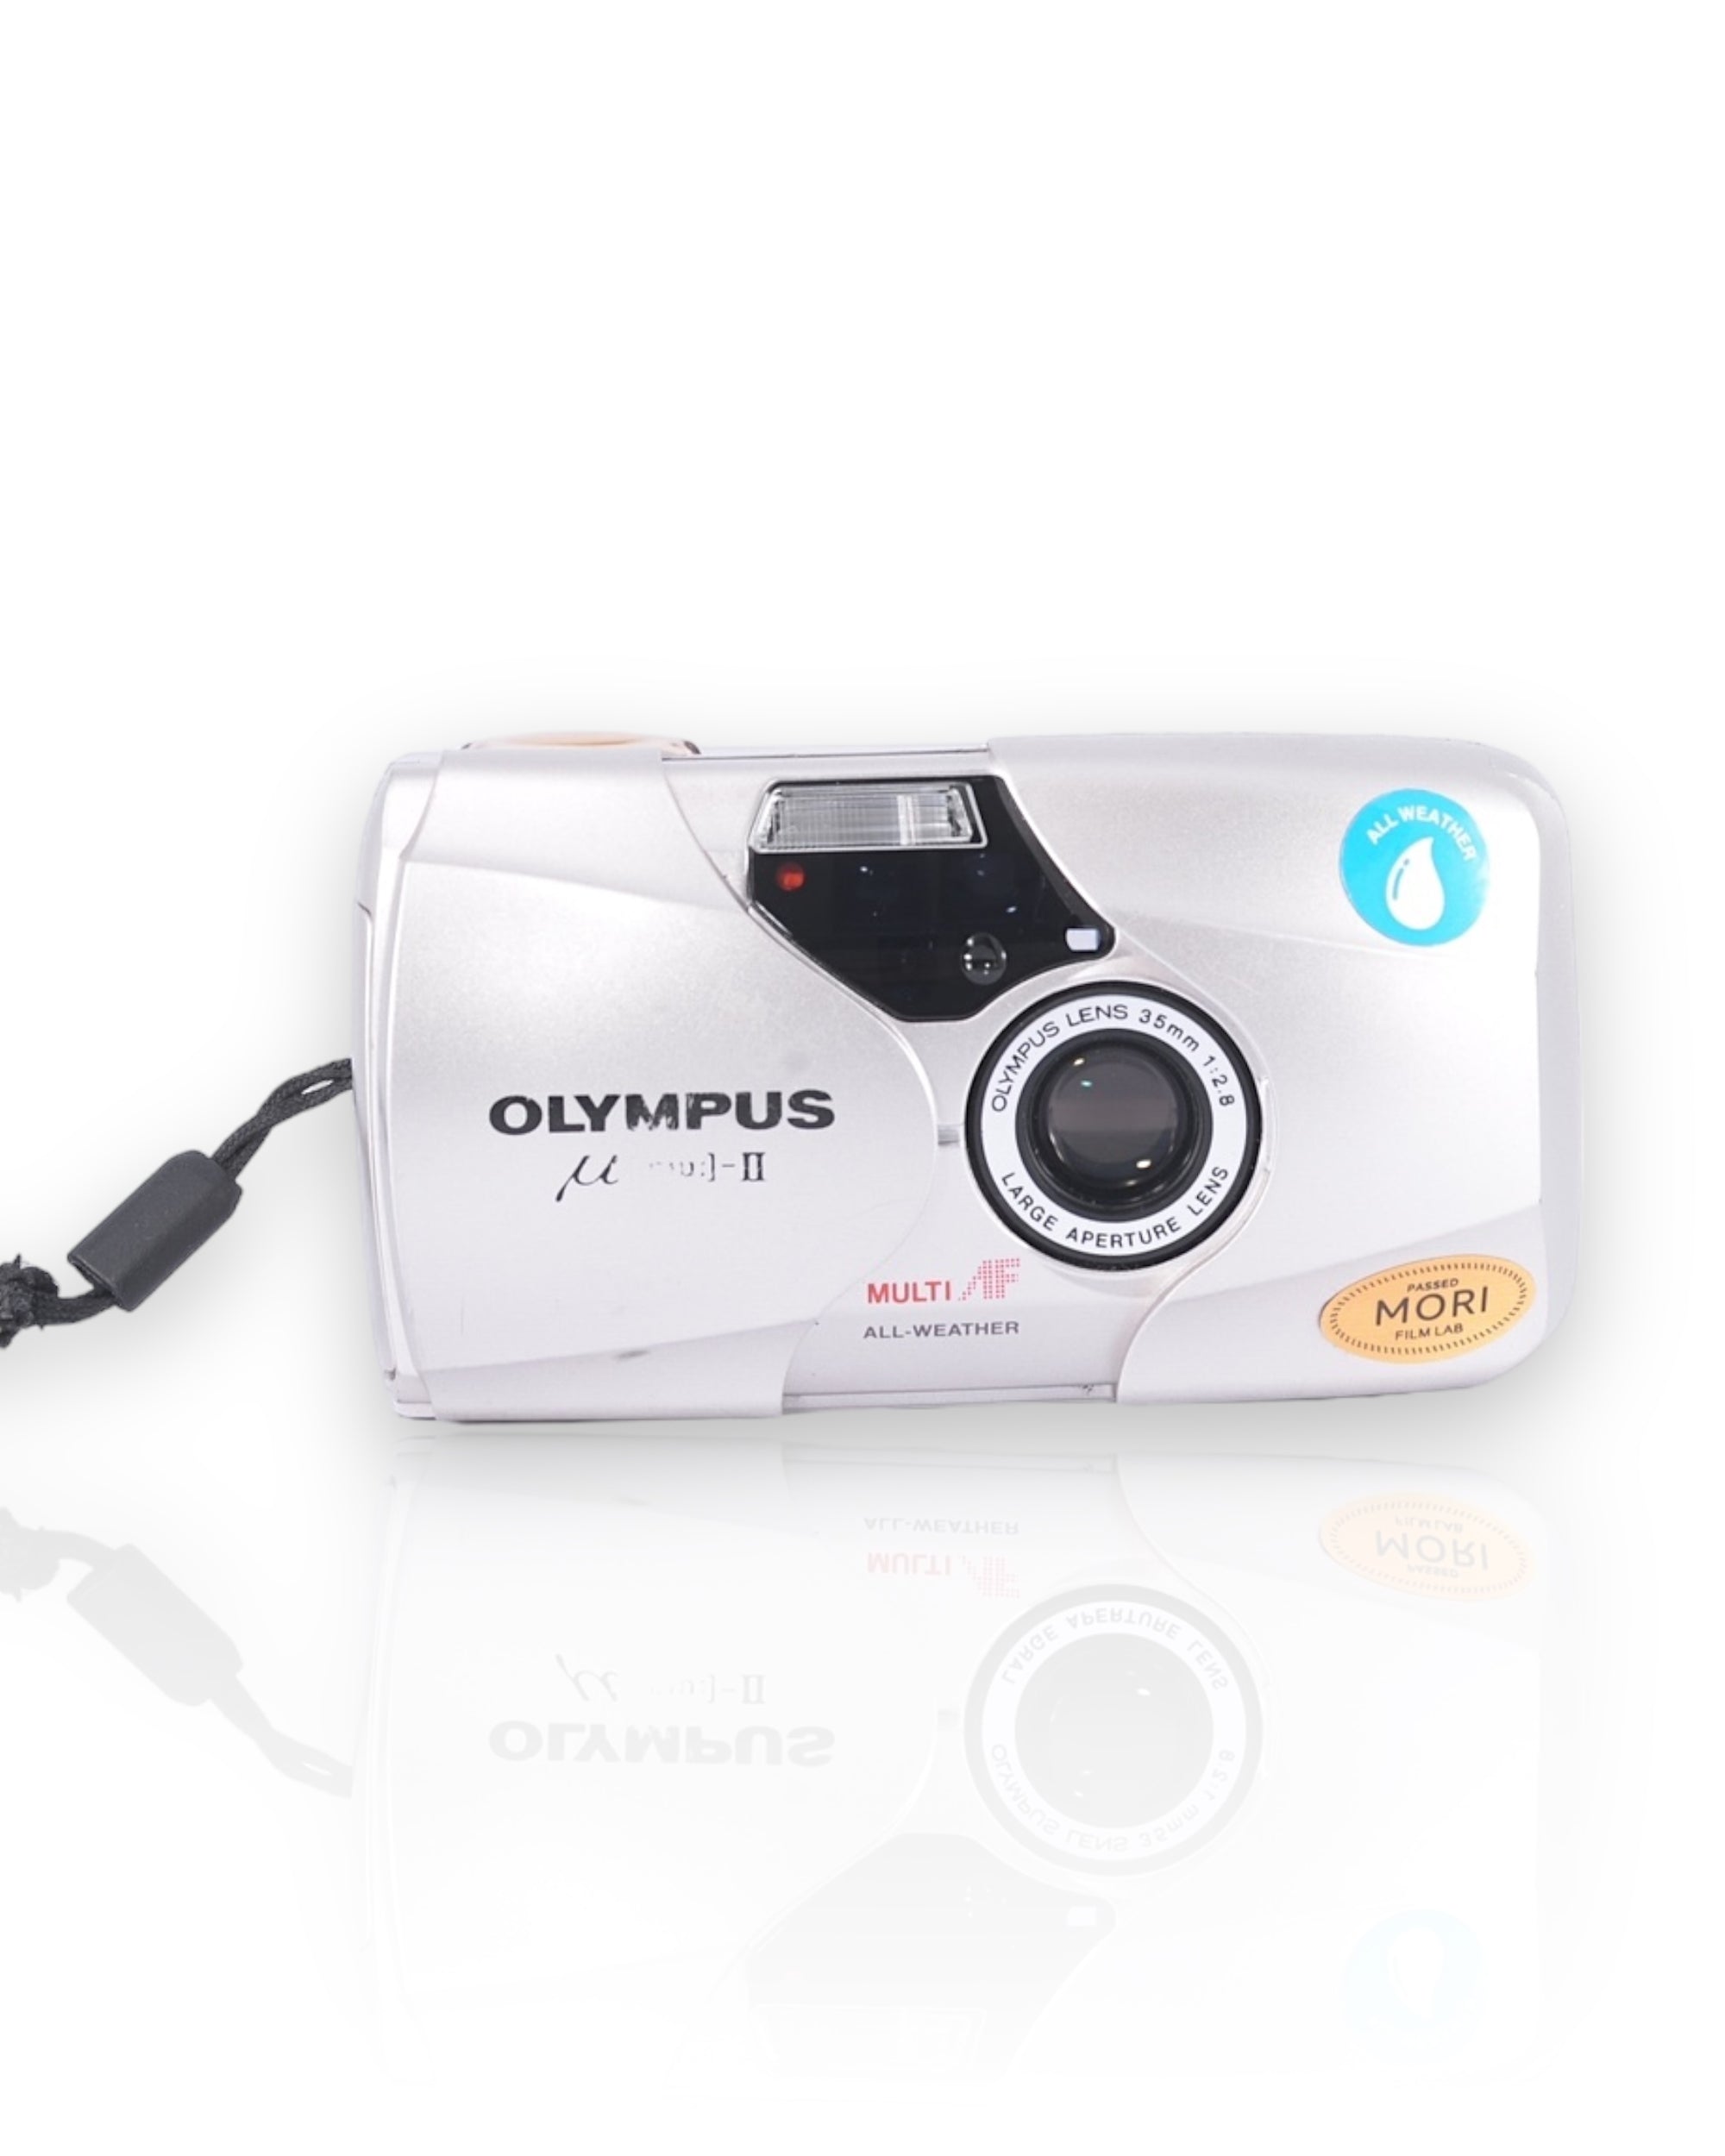 Olympus Mju-II 35mm point & shoot camera with 35mm f2.8 lens